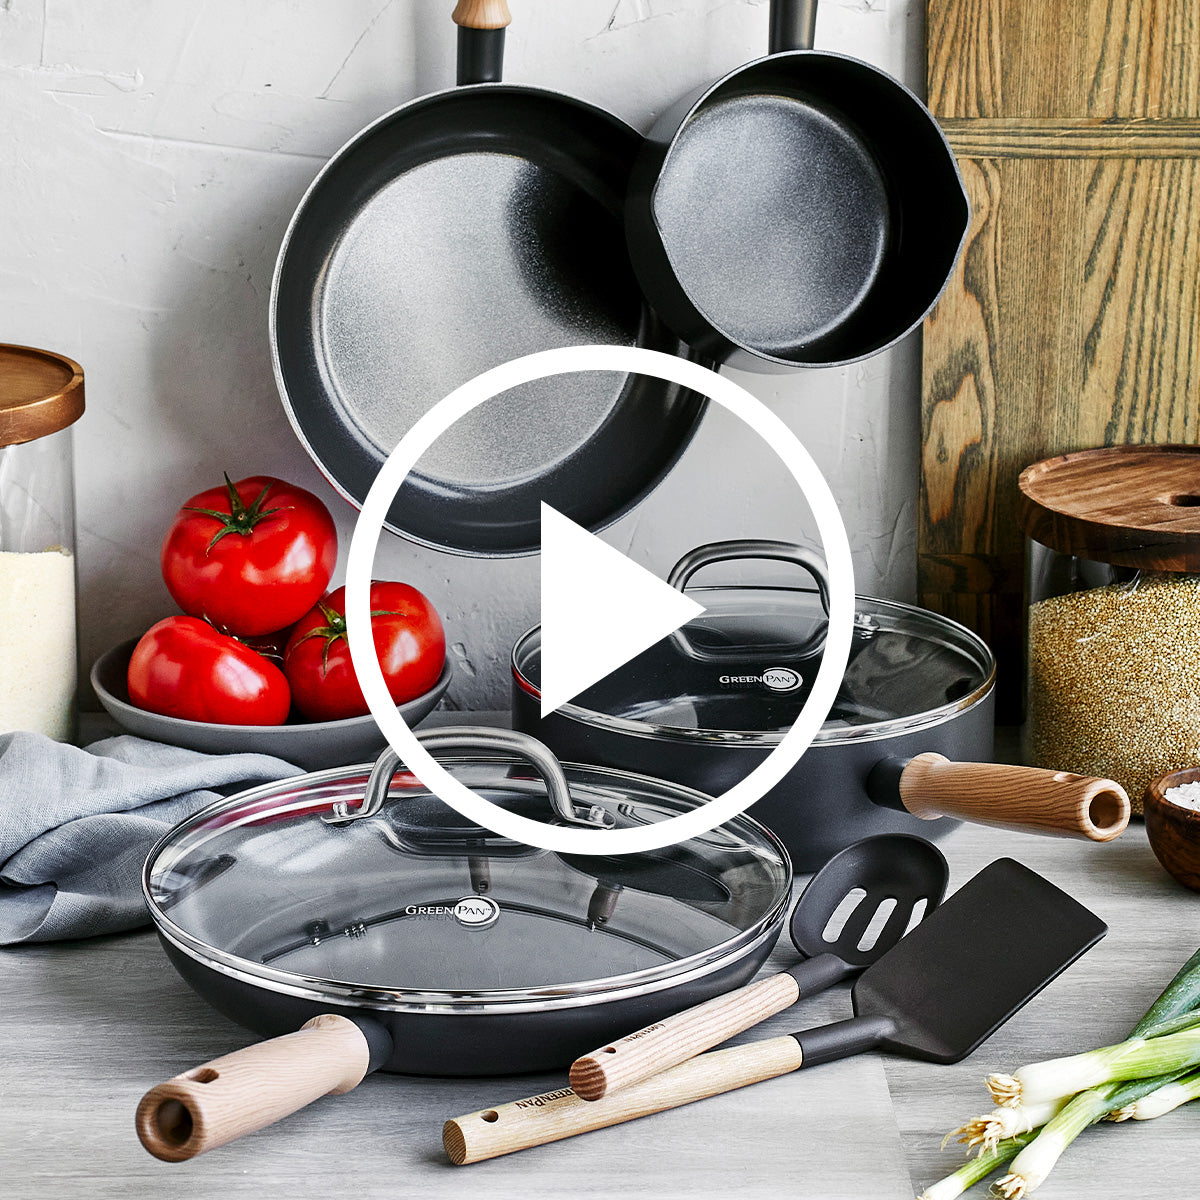 Green pan, Ceramic Non-stick cookware set. By far one of the best cook, Cookware Set